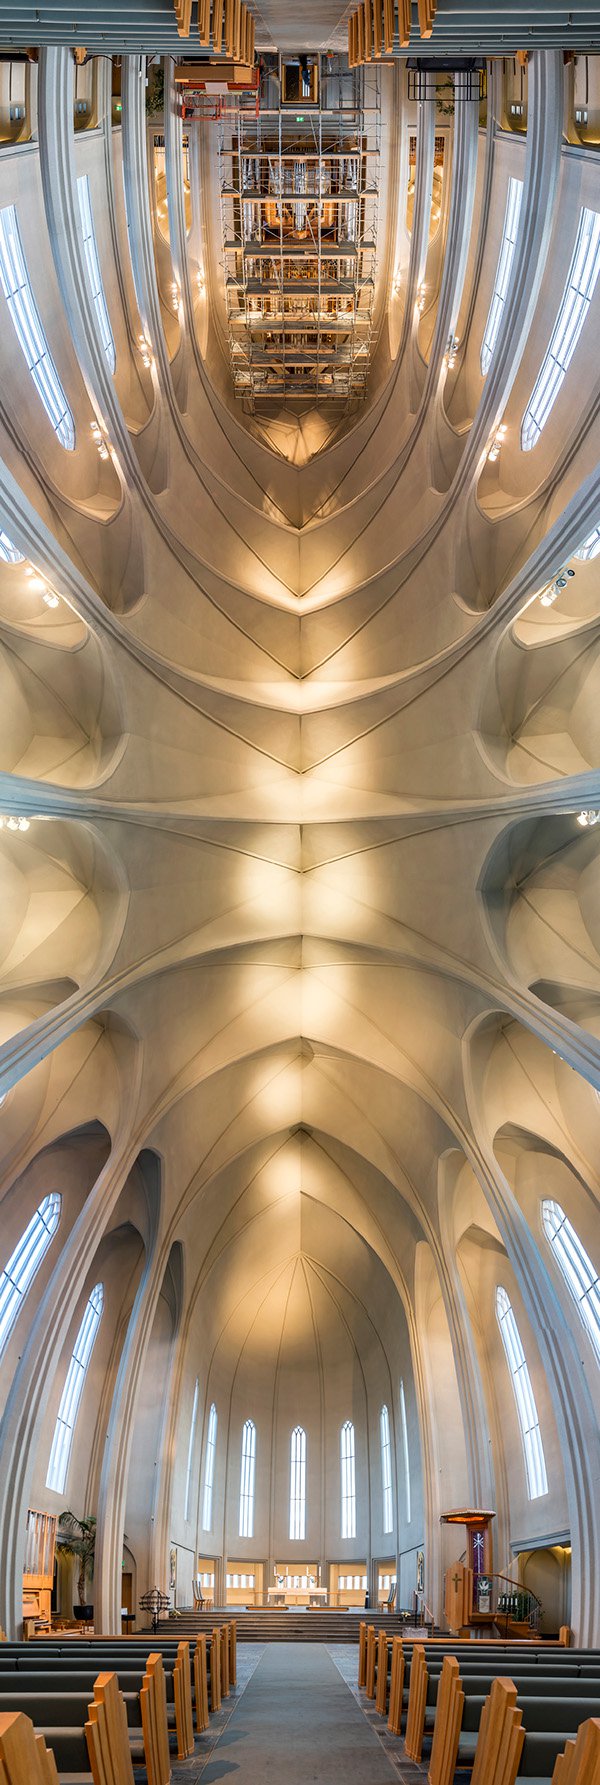 Vertical Churches An Ethereal Architecture Photography Series By Richard Silver 3